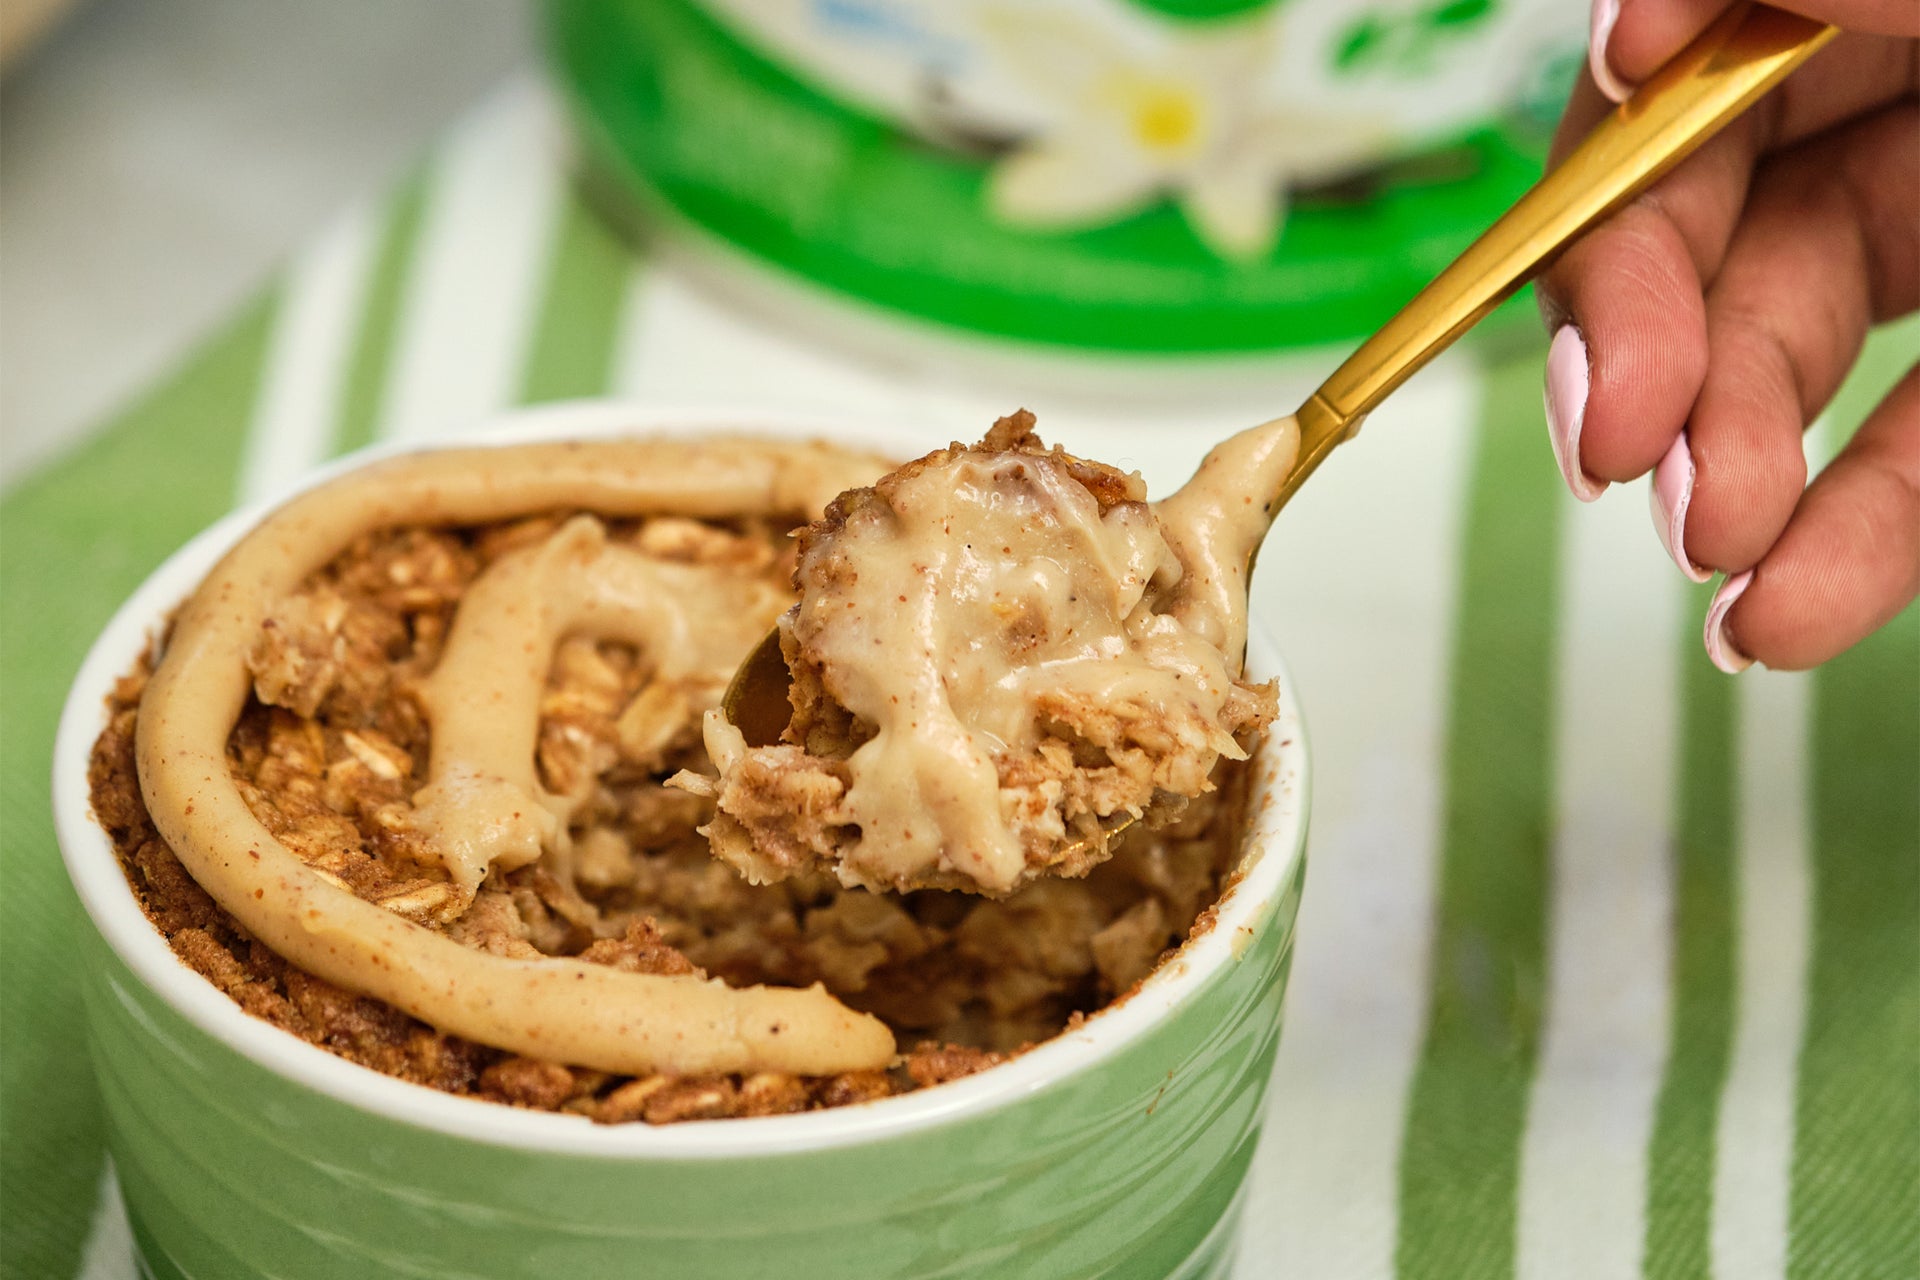 Cinnamon Roll Baked Protein Oats